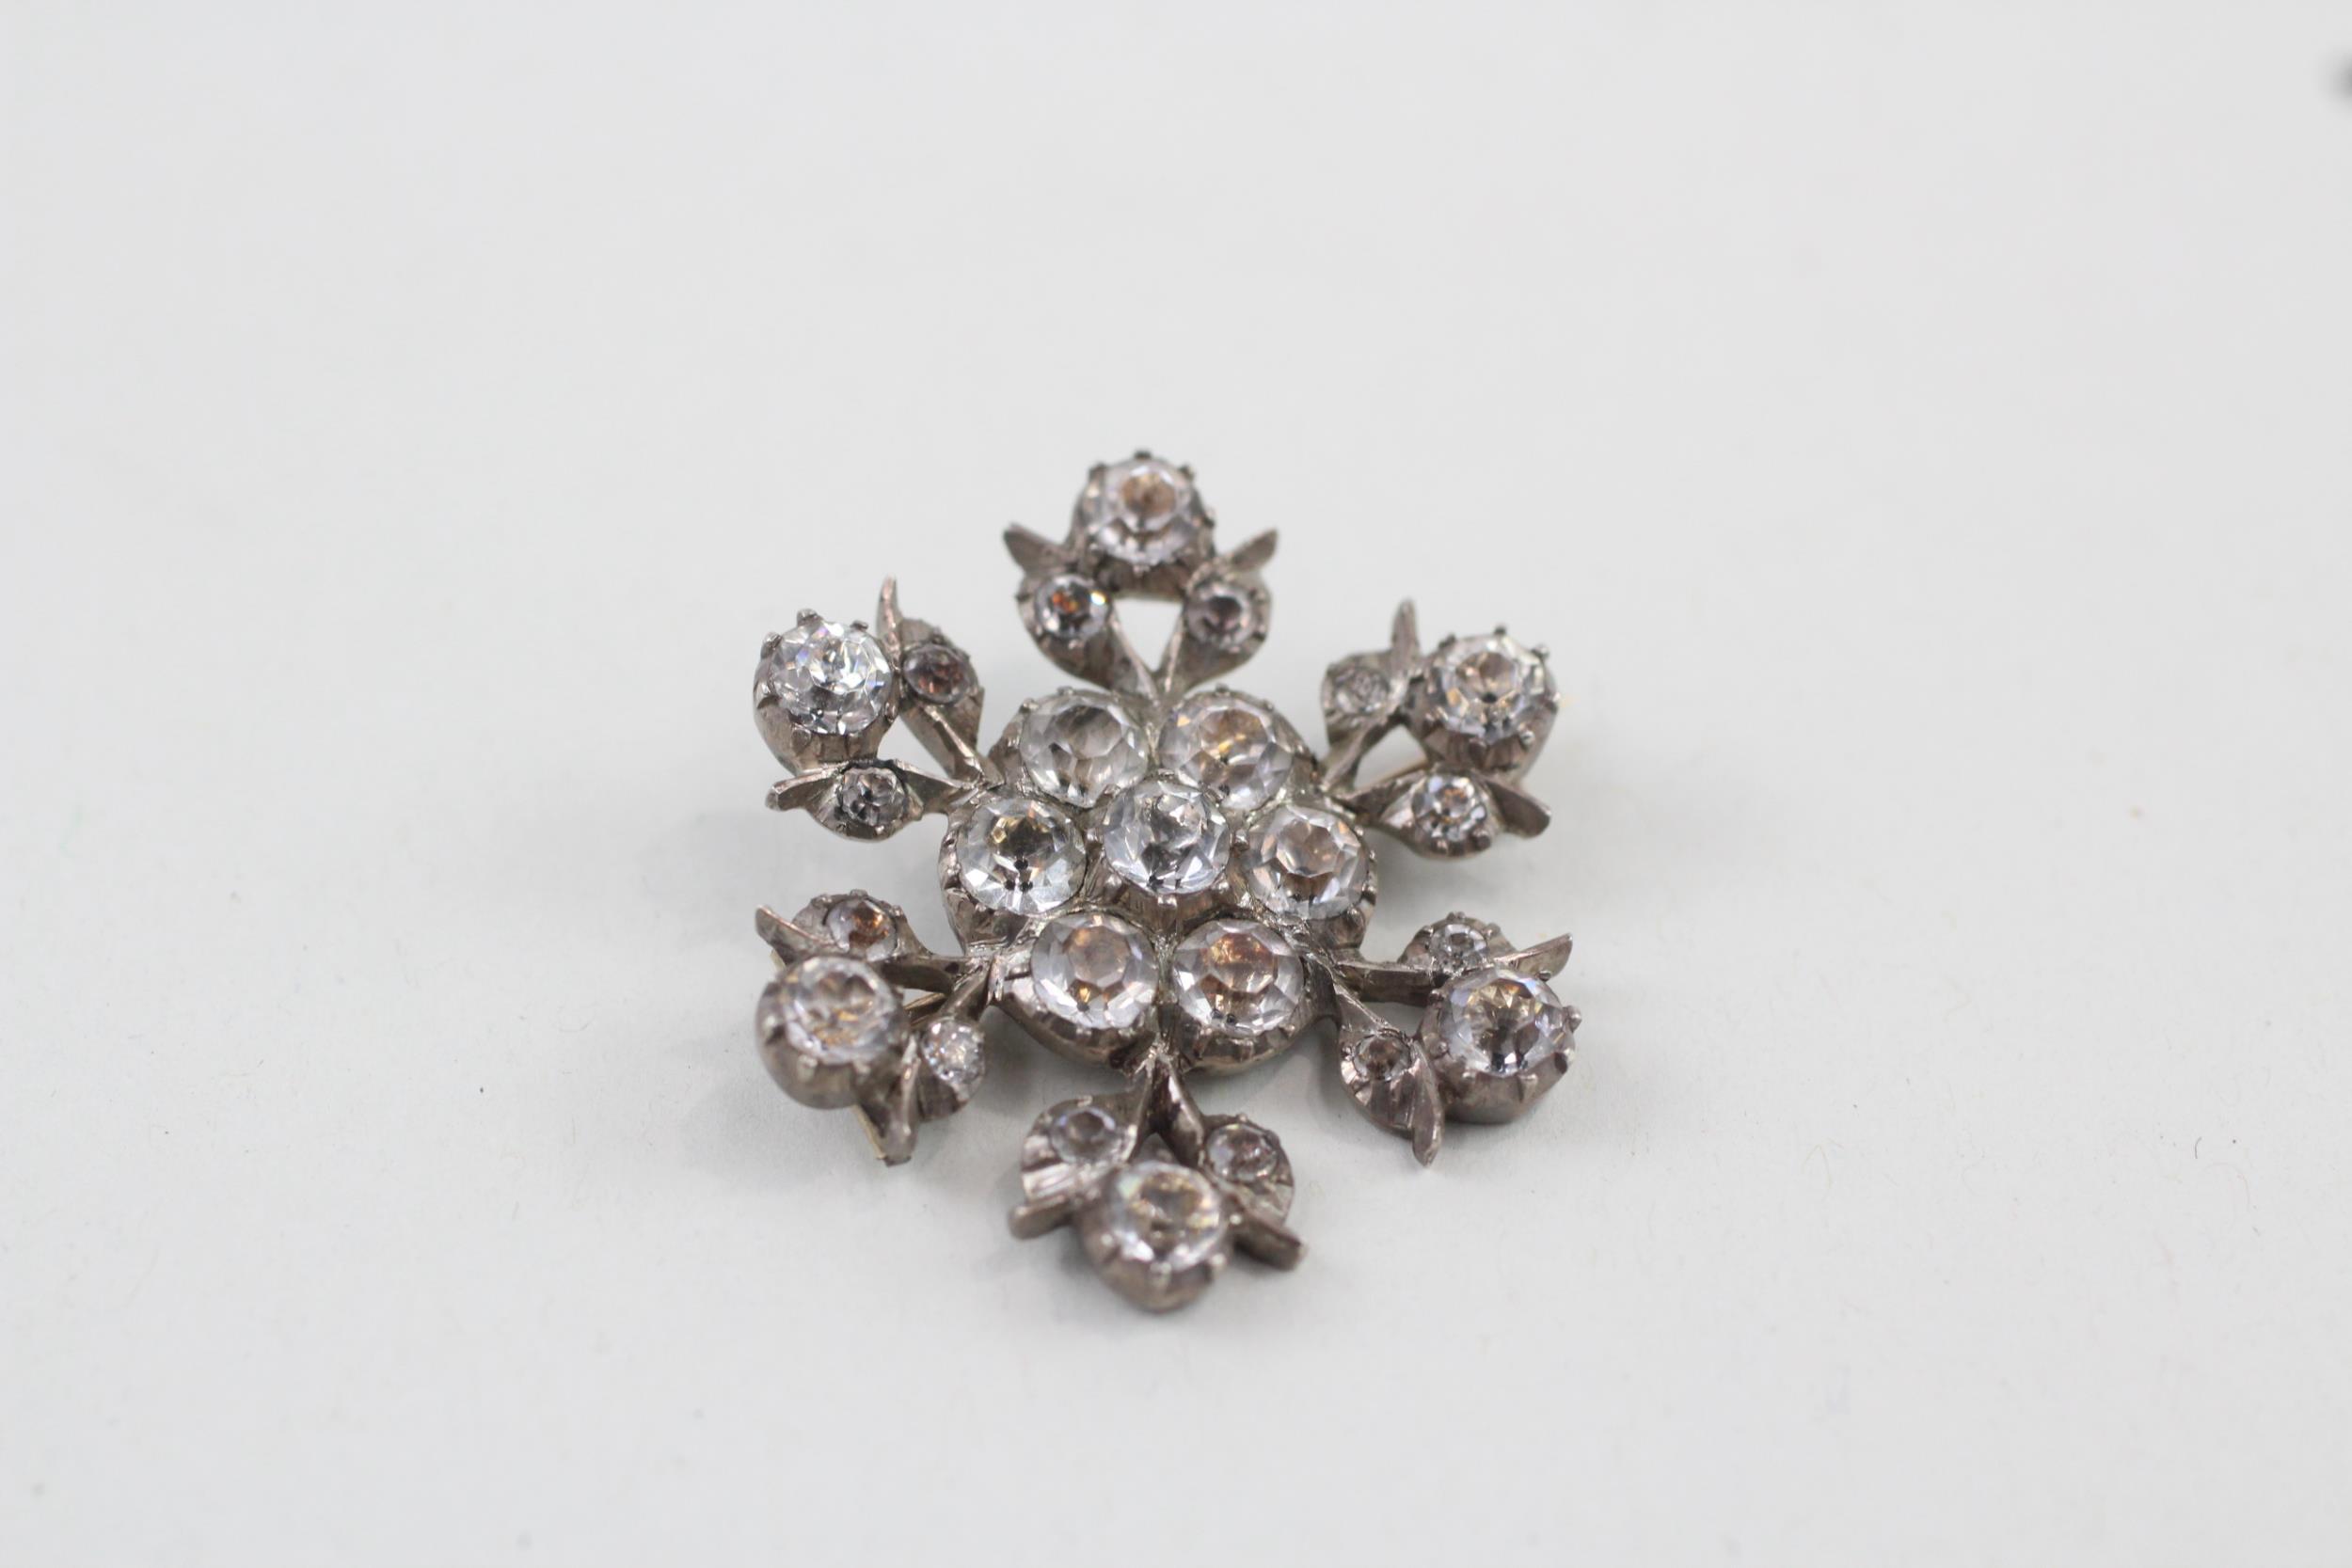 Silver Georgian brooch with black dot paste (8g) - Image 2 of 5